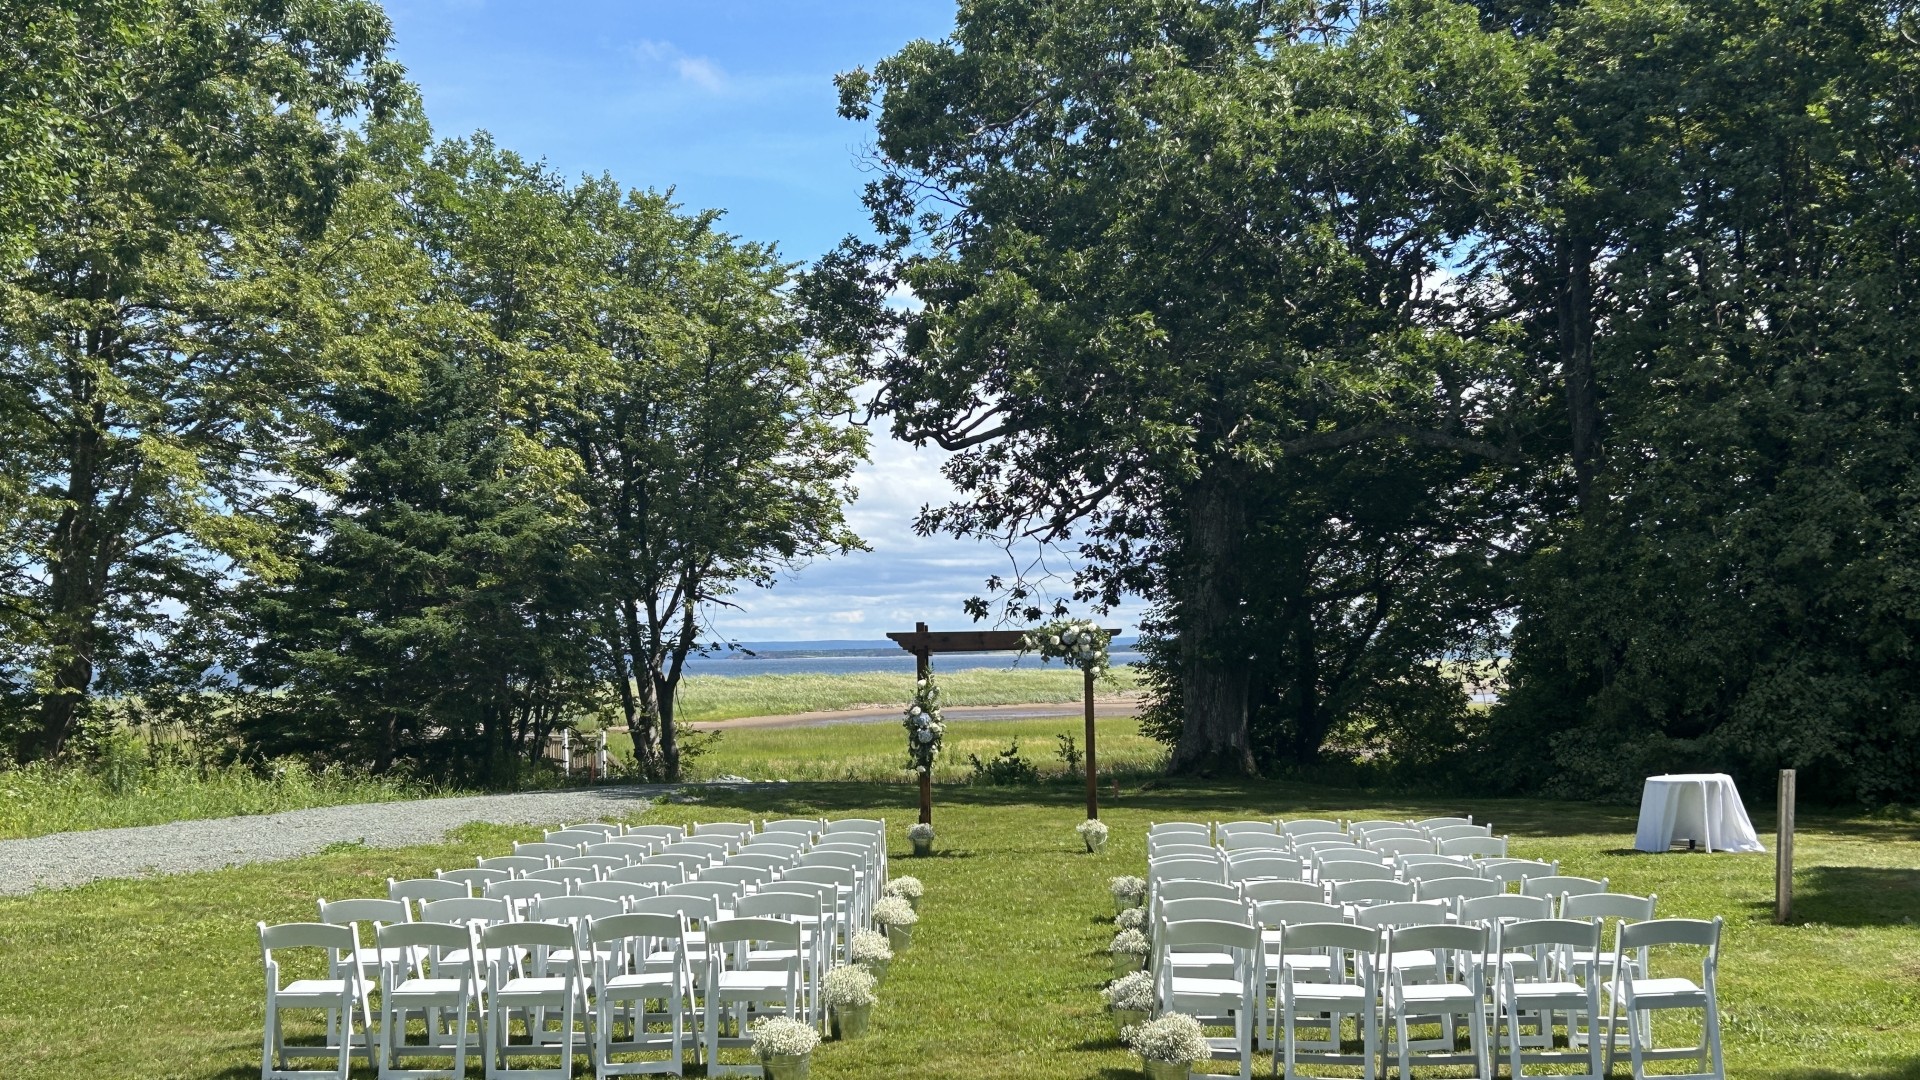 Chairs and an arch set up for an outdoor wedding